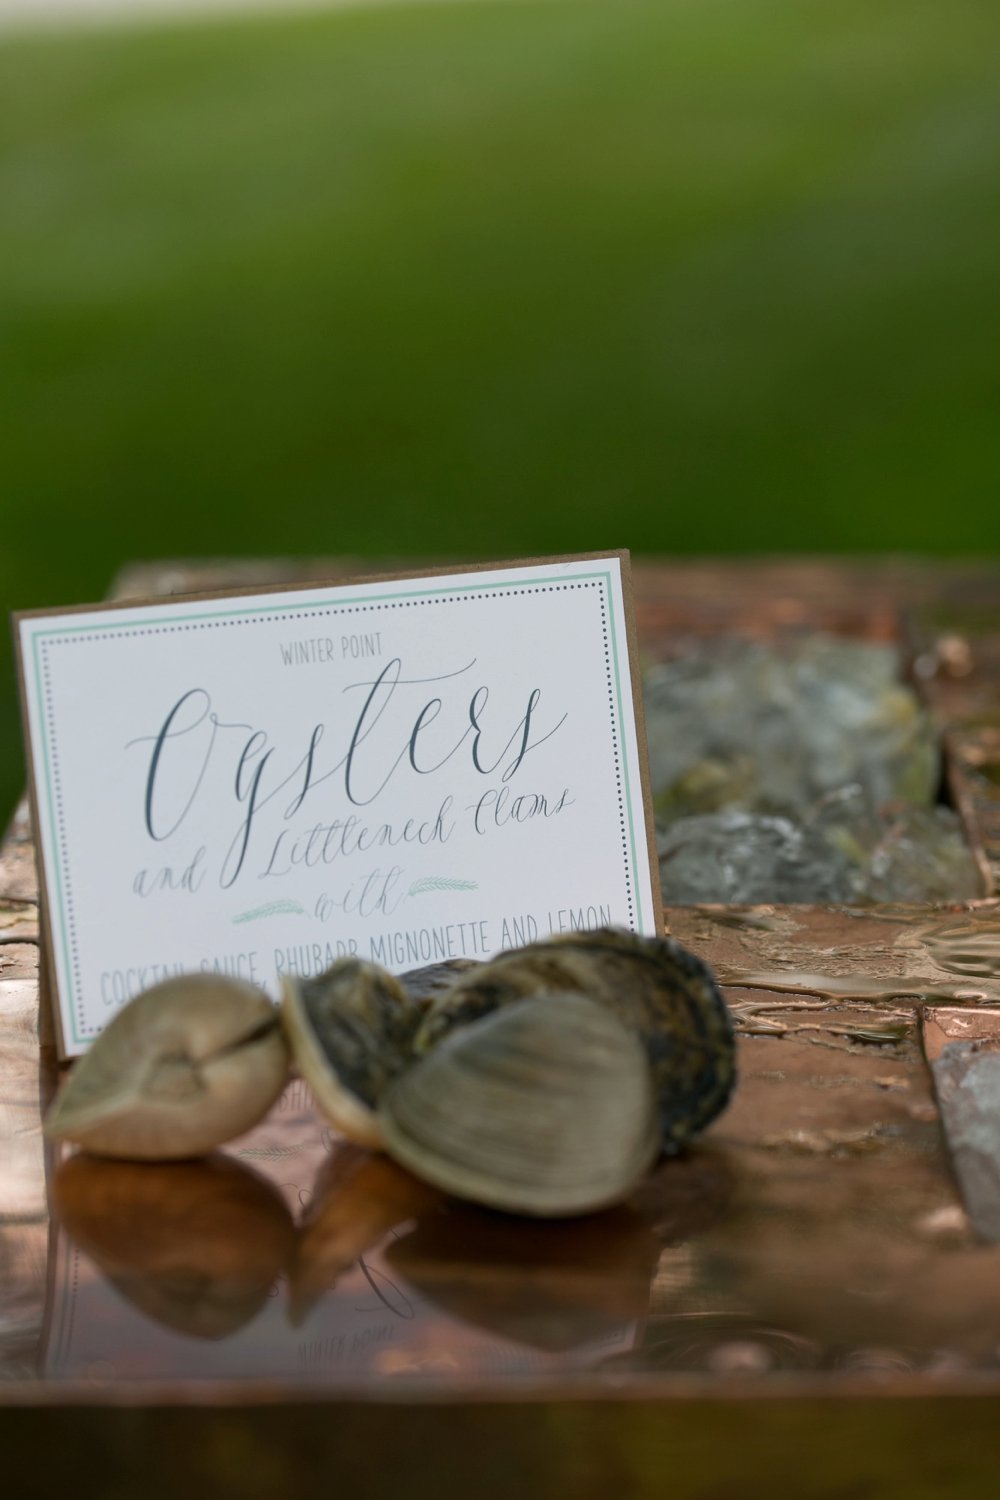 Oyster cocktail hour station via Eventide for rustic wedding at The Barn on Walnut Hill in Maine